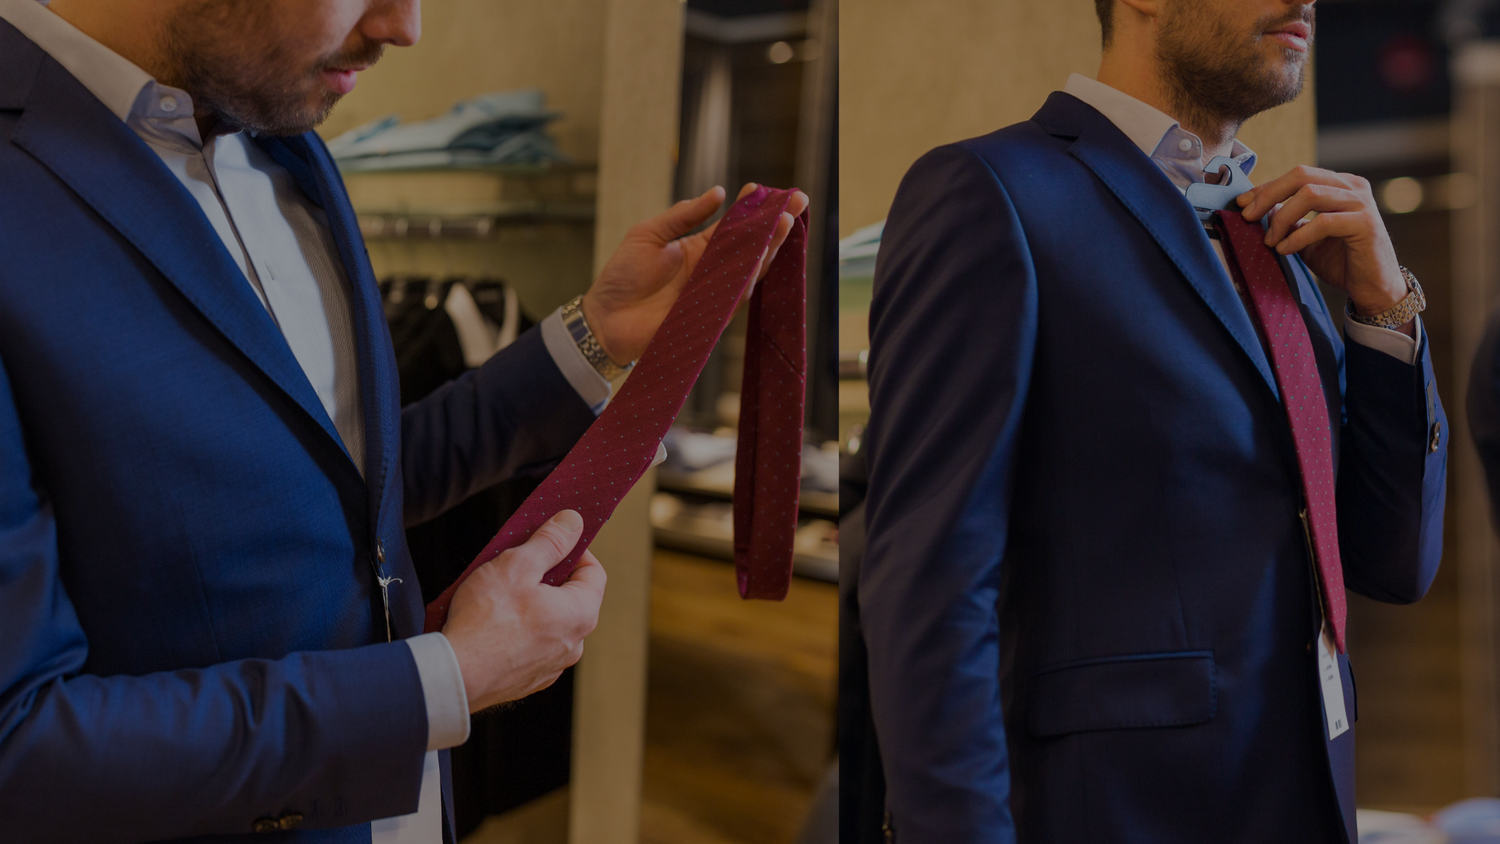 MAKE A SHARP IMPRESSION. Our collection includes on-trend sophisticated inspiring neck ties.